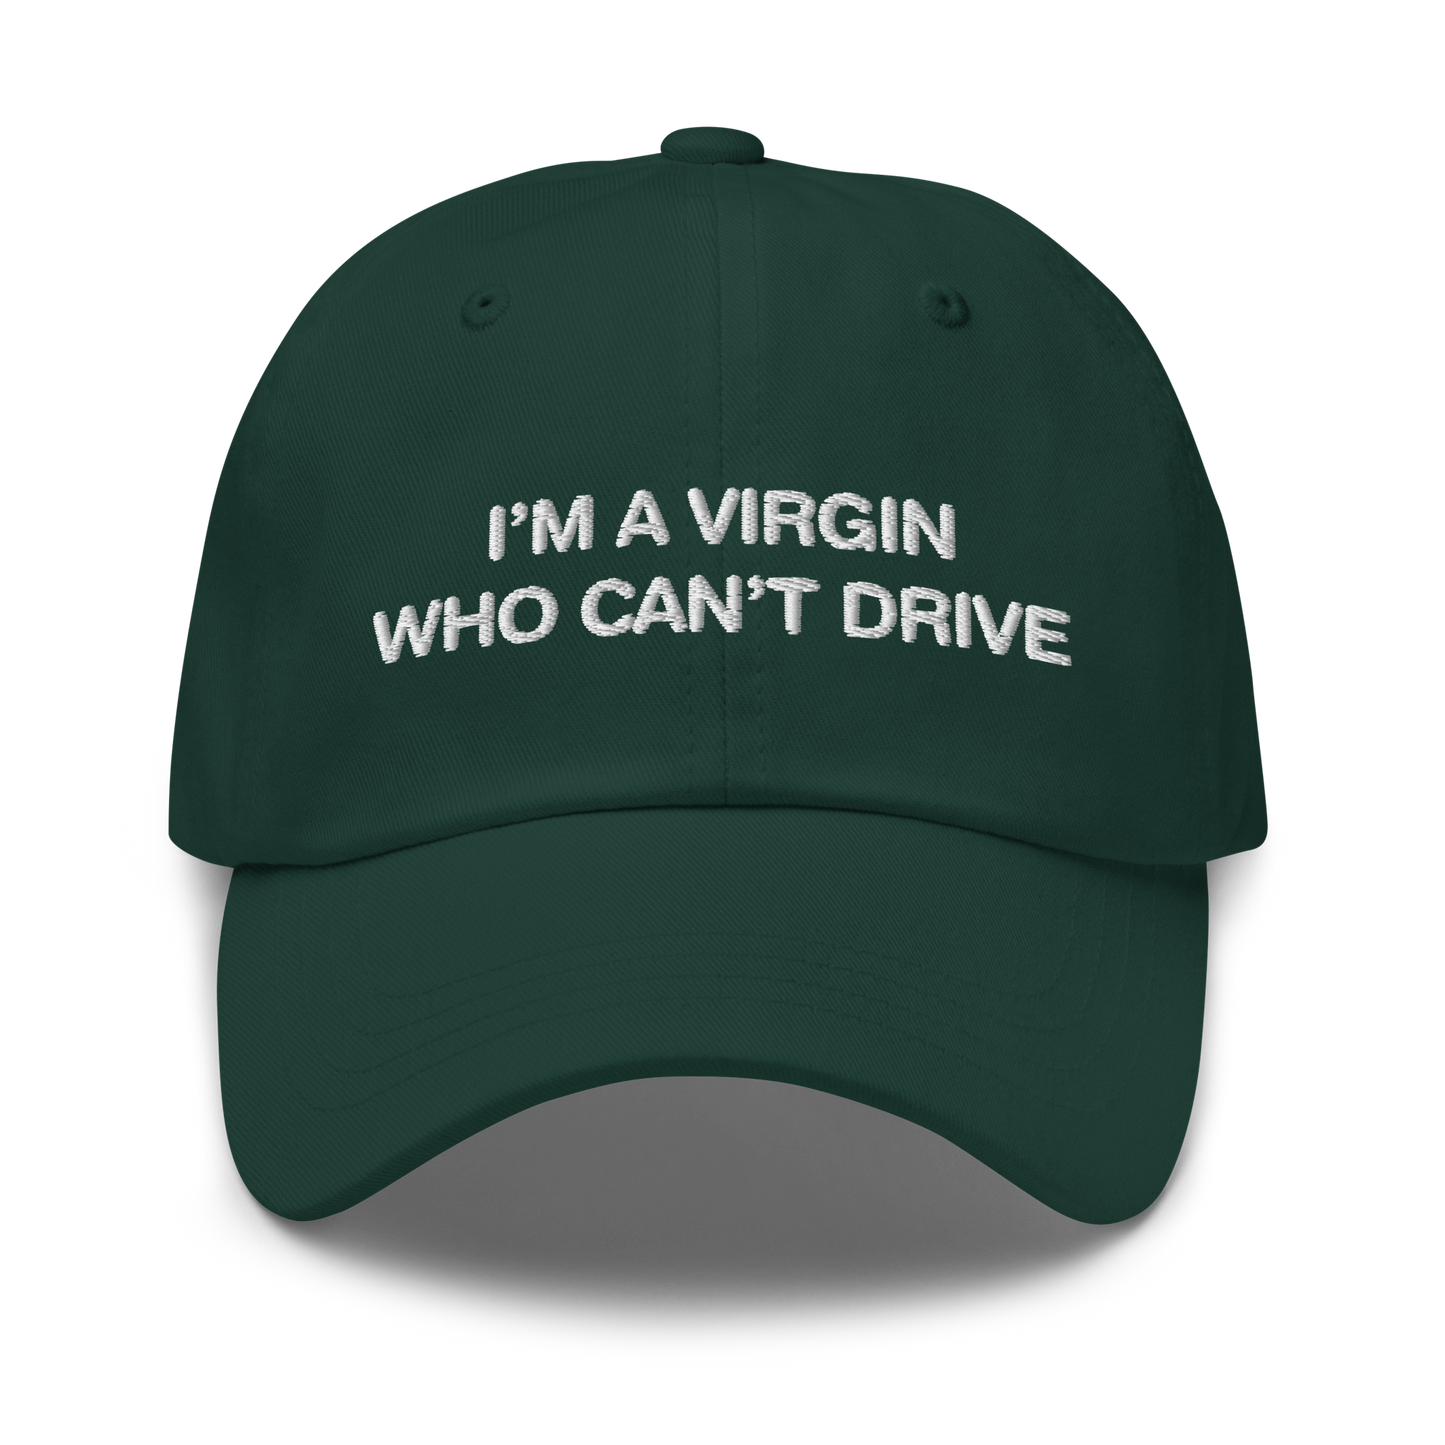 I'm A Virgin Who Can't Drive Hat.